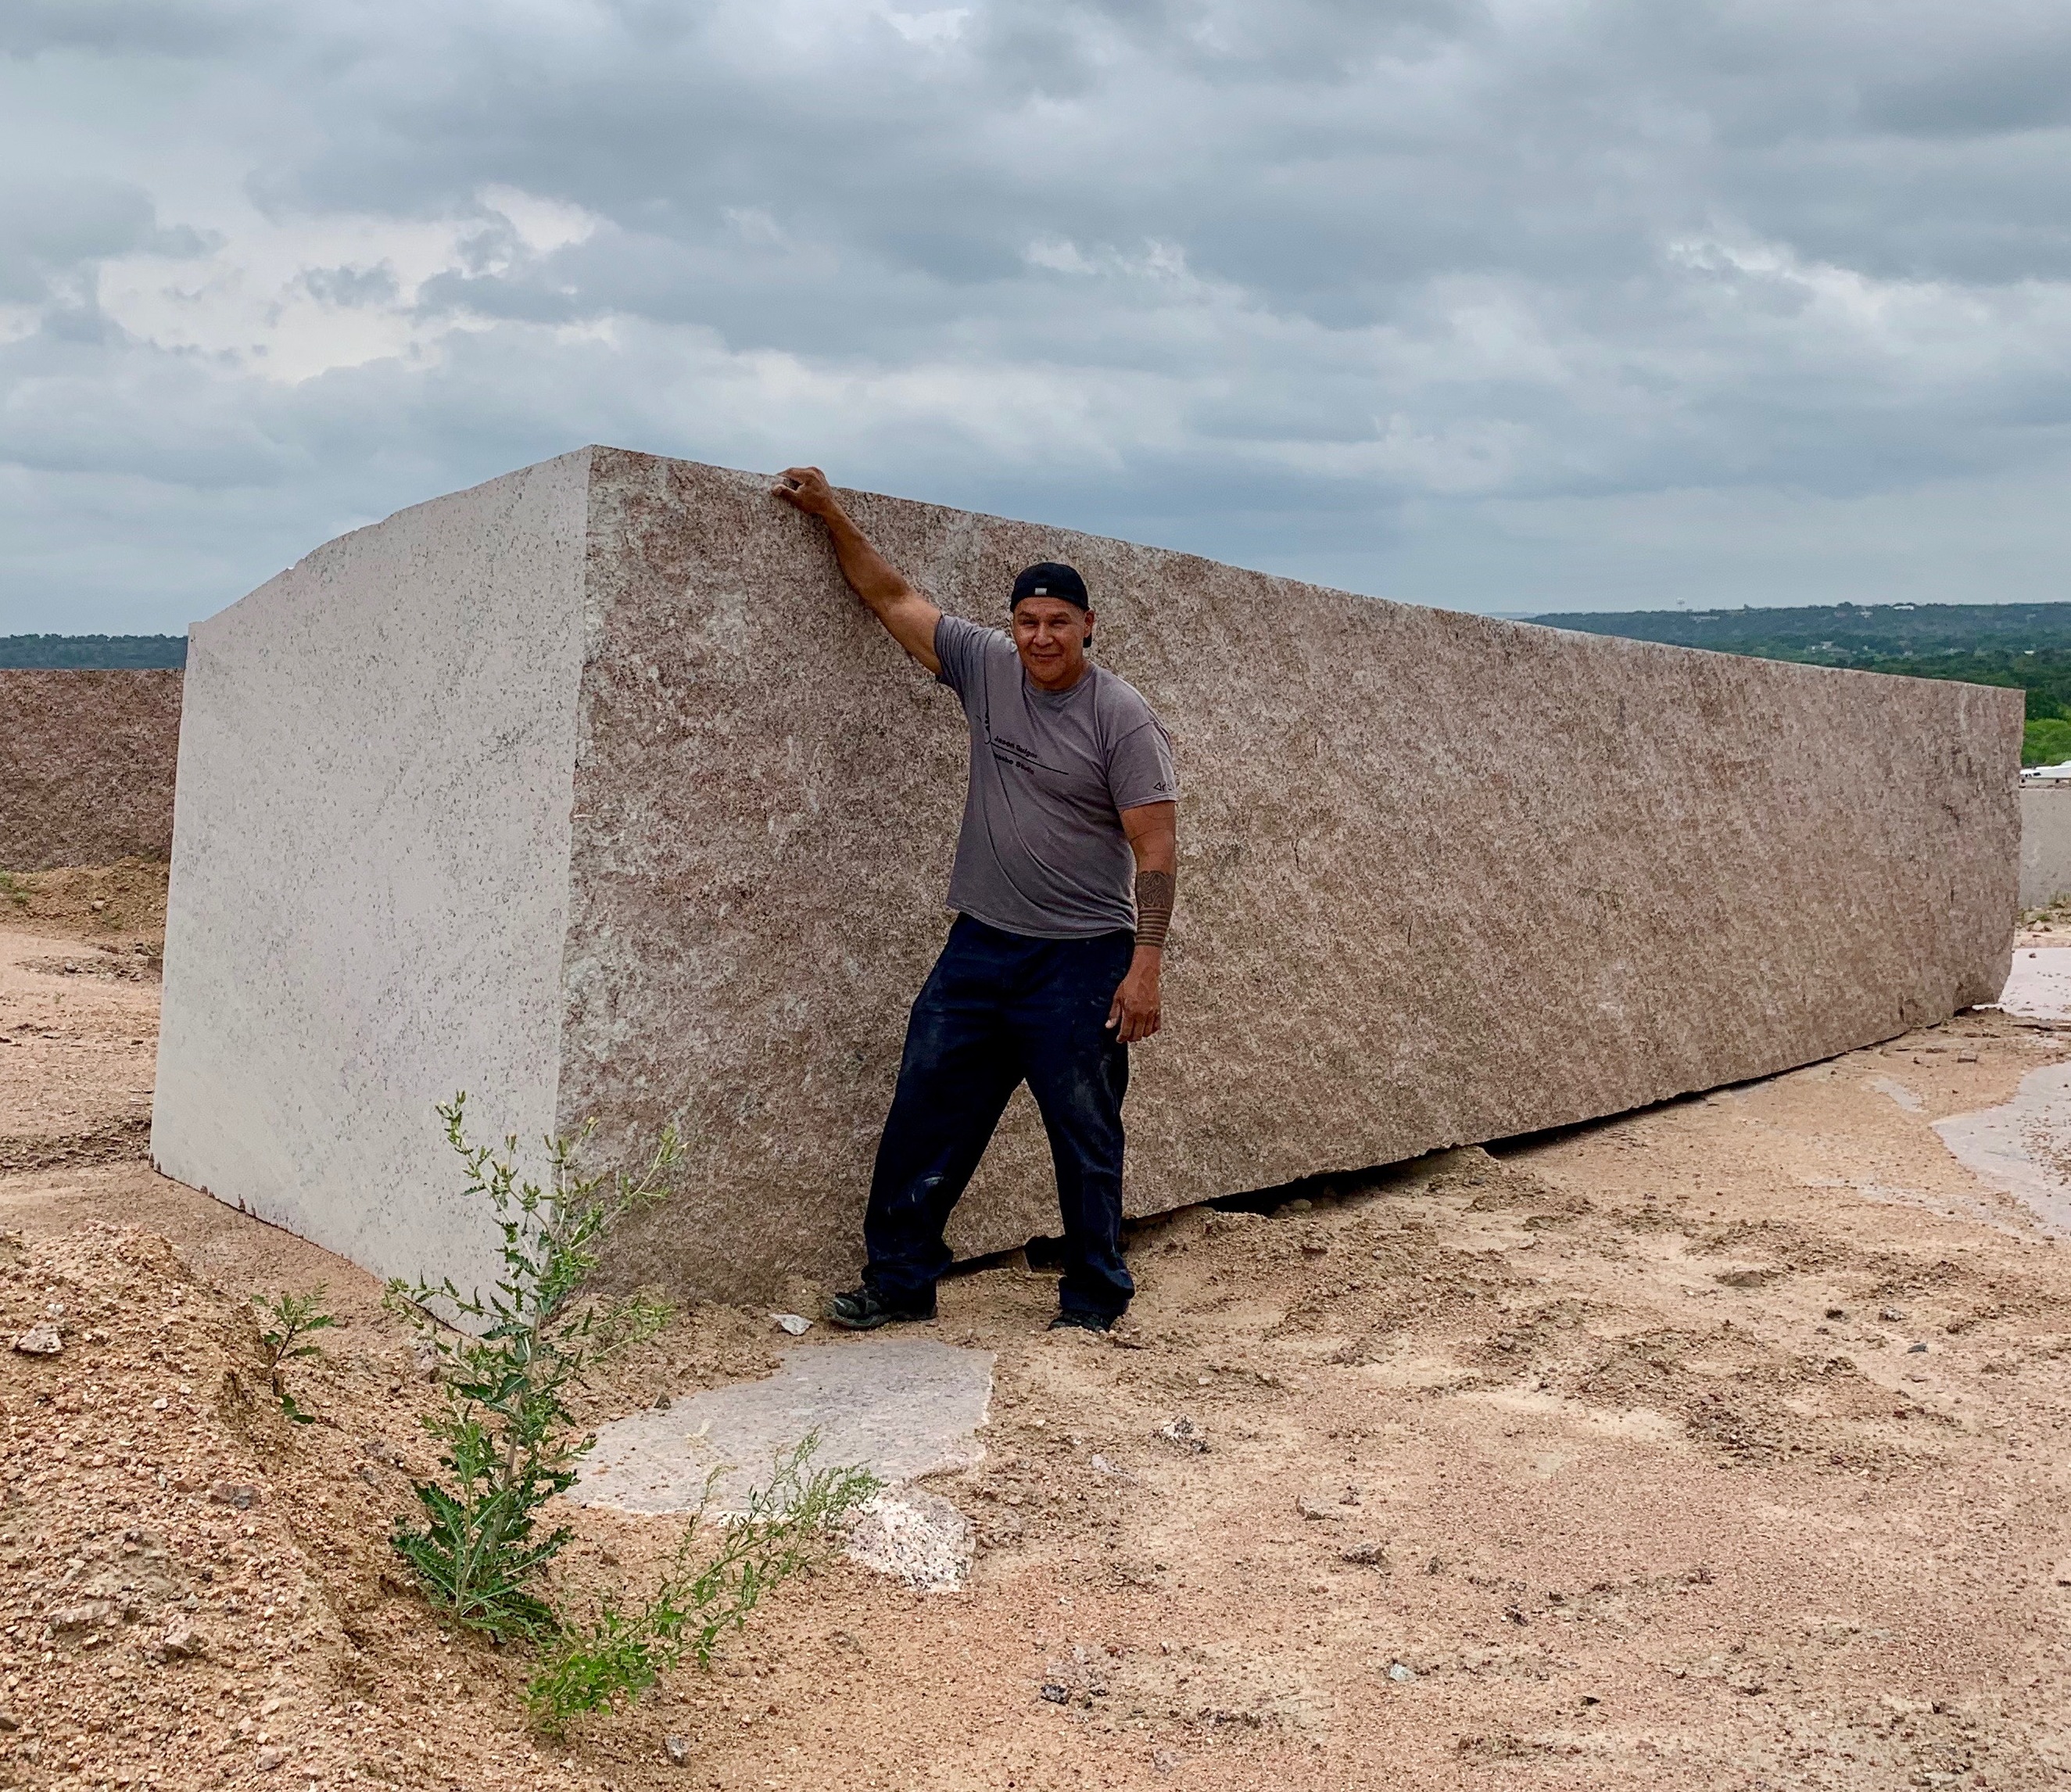 Jason Quigno immediately had to figure out how to take this quarry block home, or at least have his photo taken with it